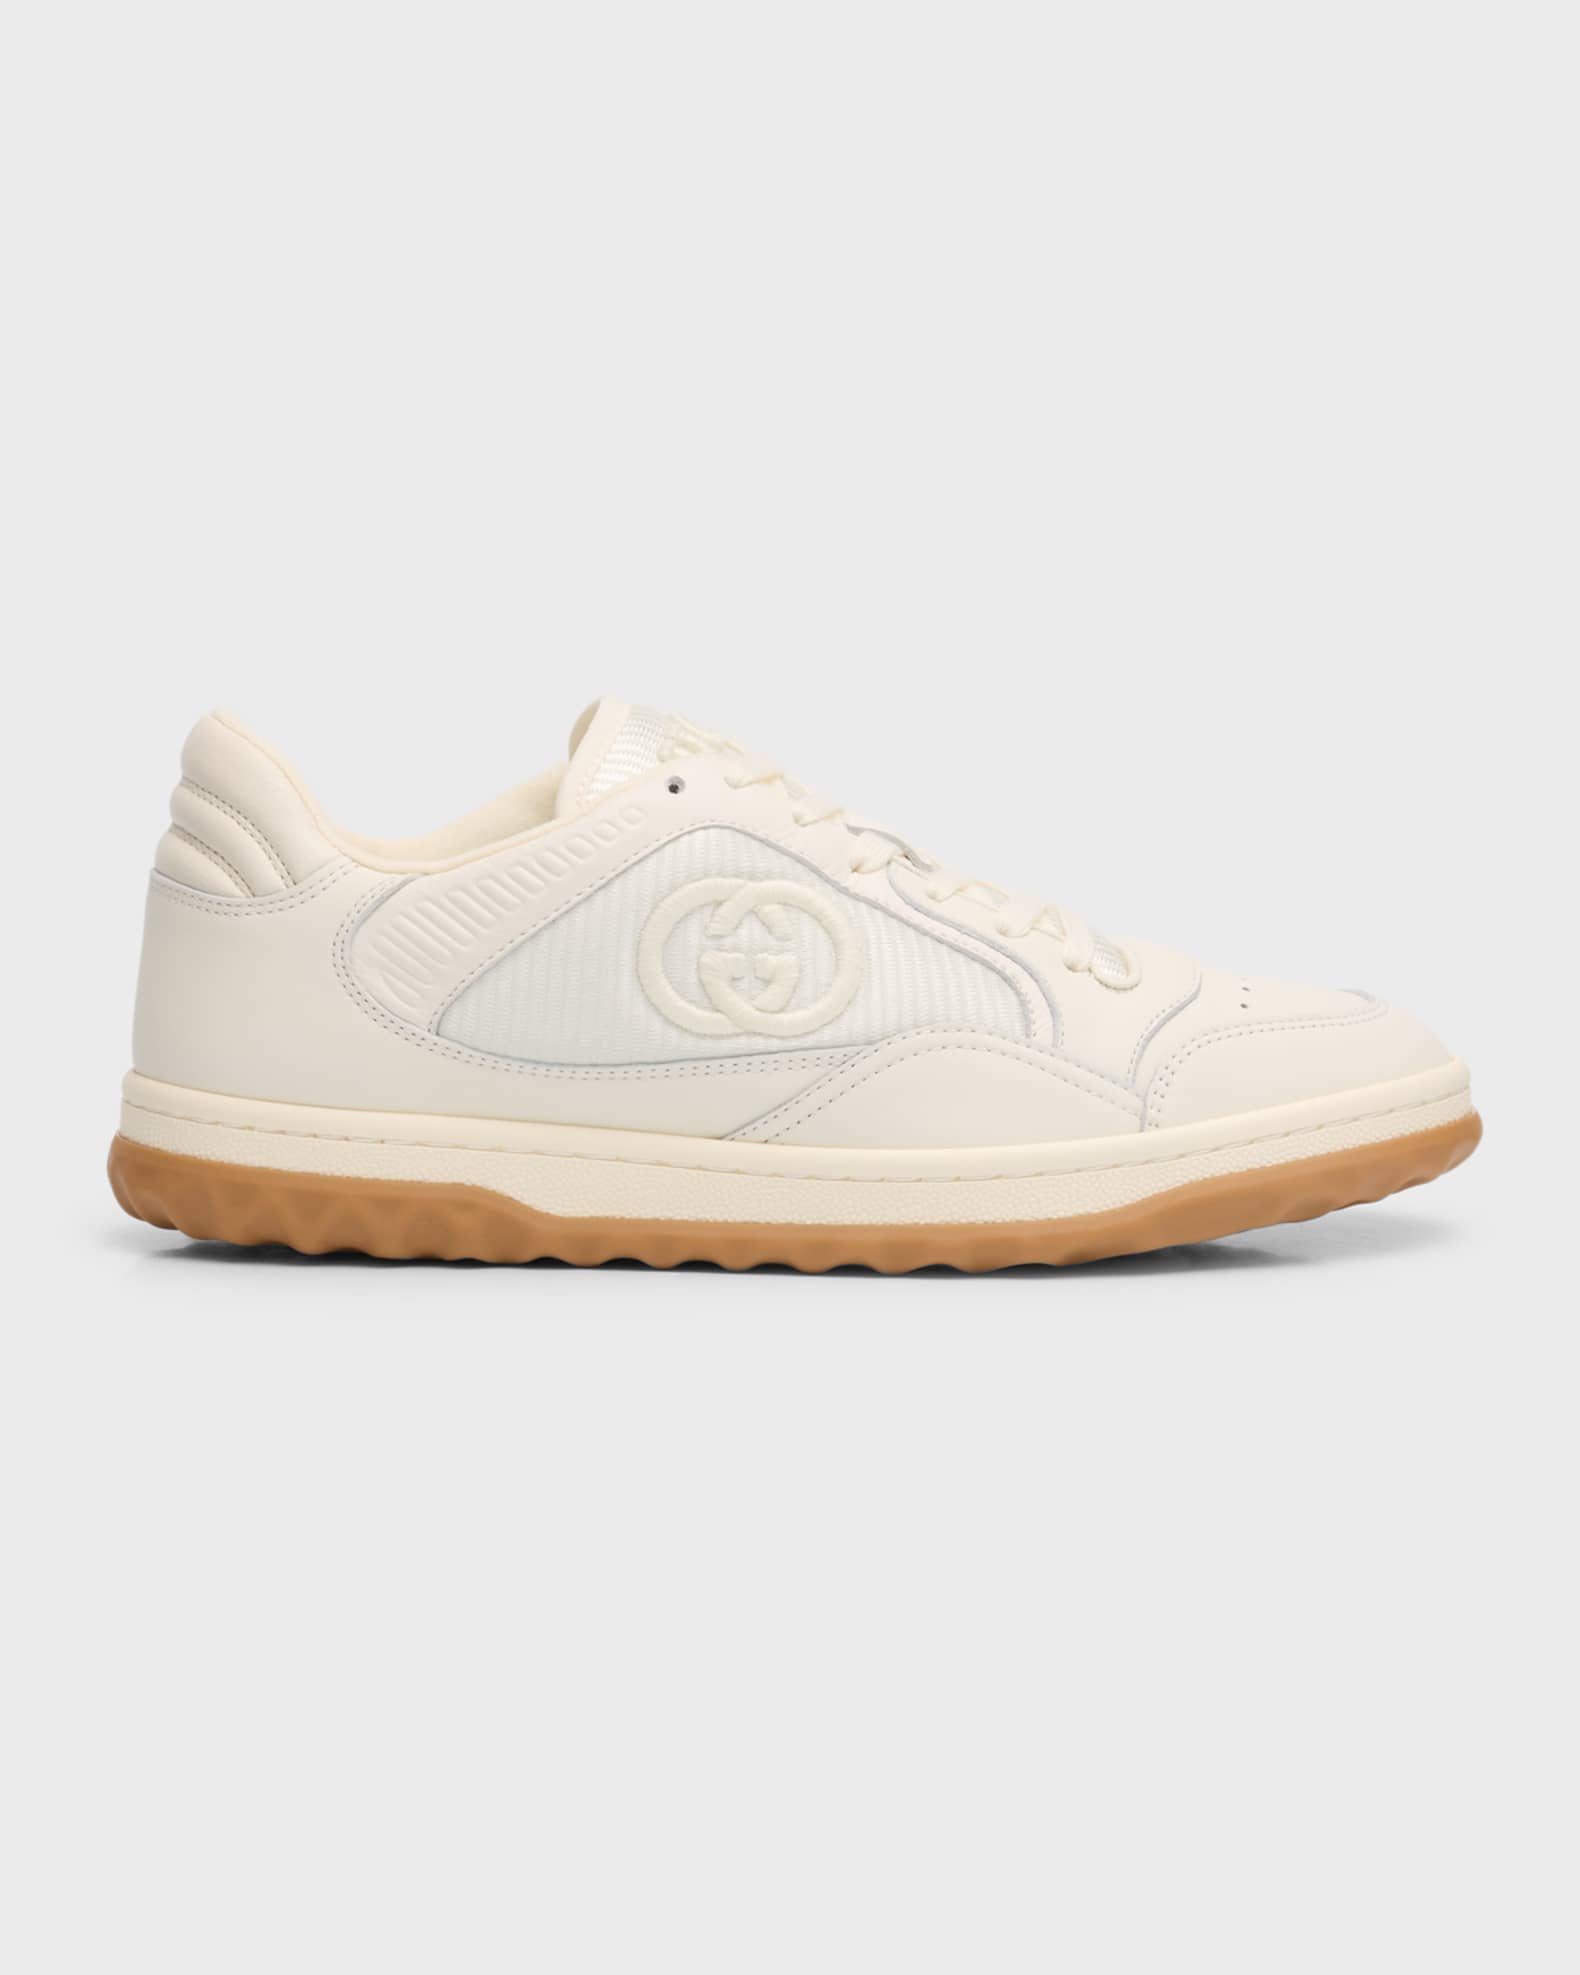 Gucci Mac80 GG Leather Runner Sneakers | Neiman Marcus